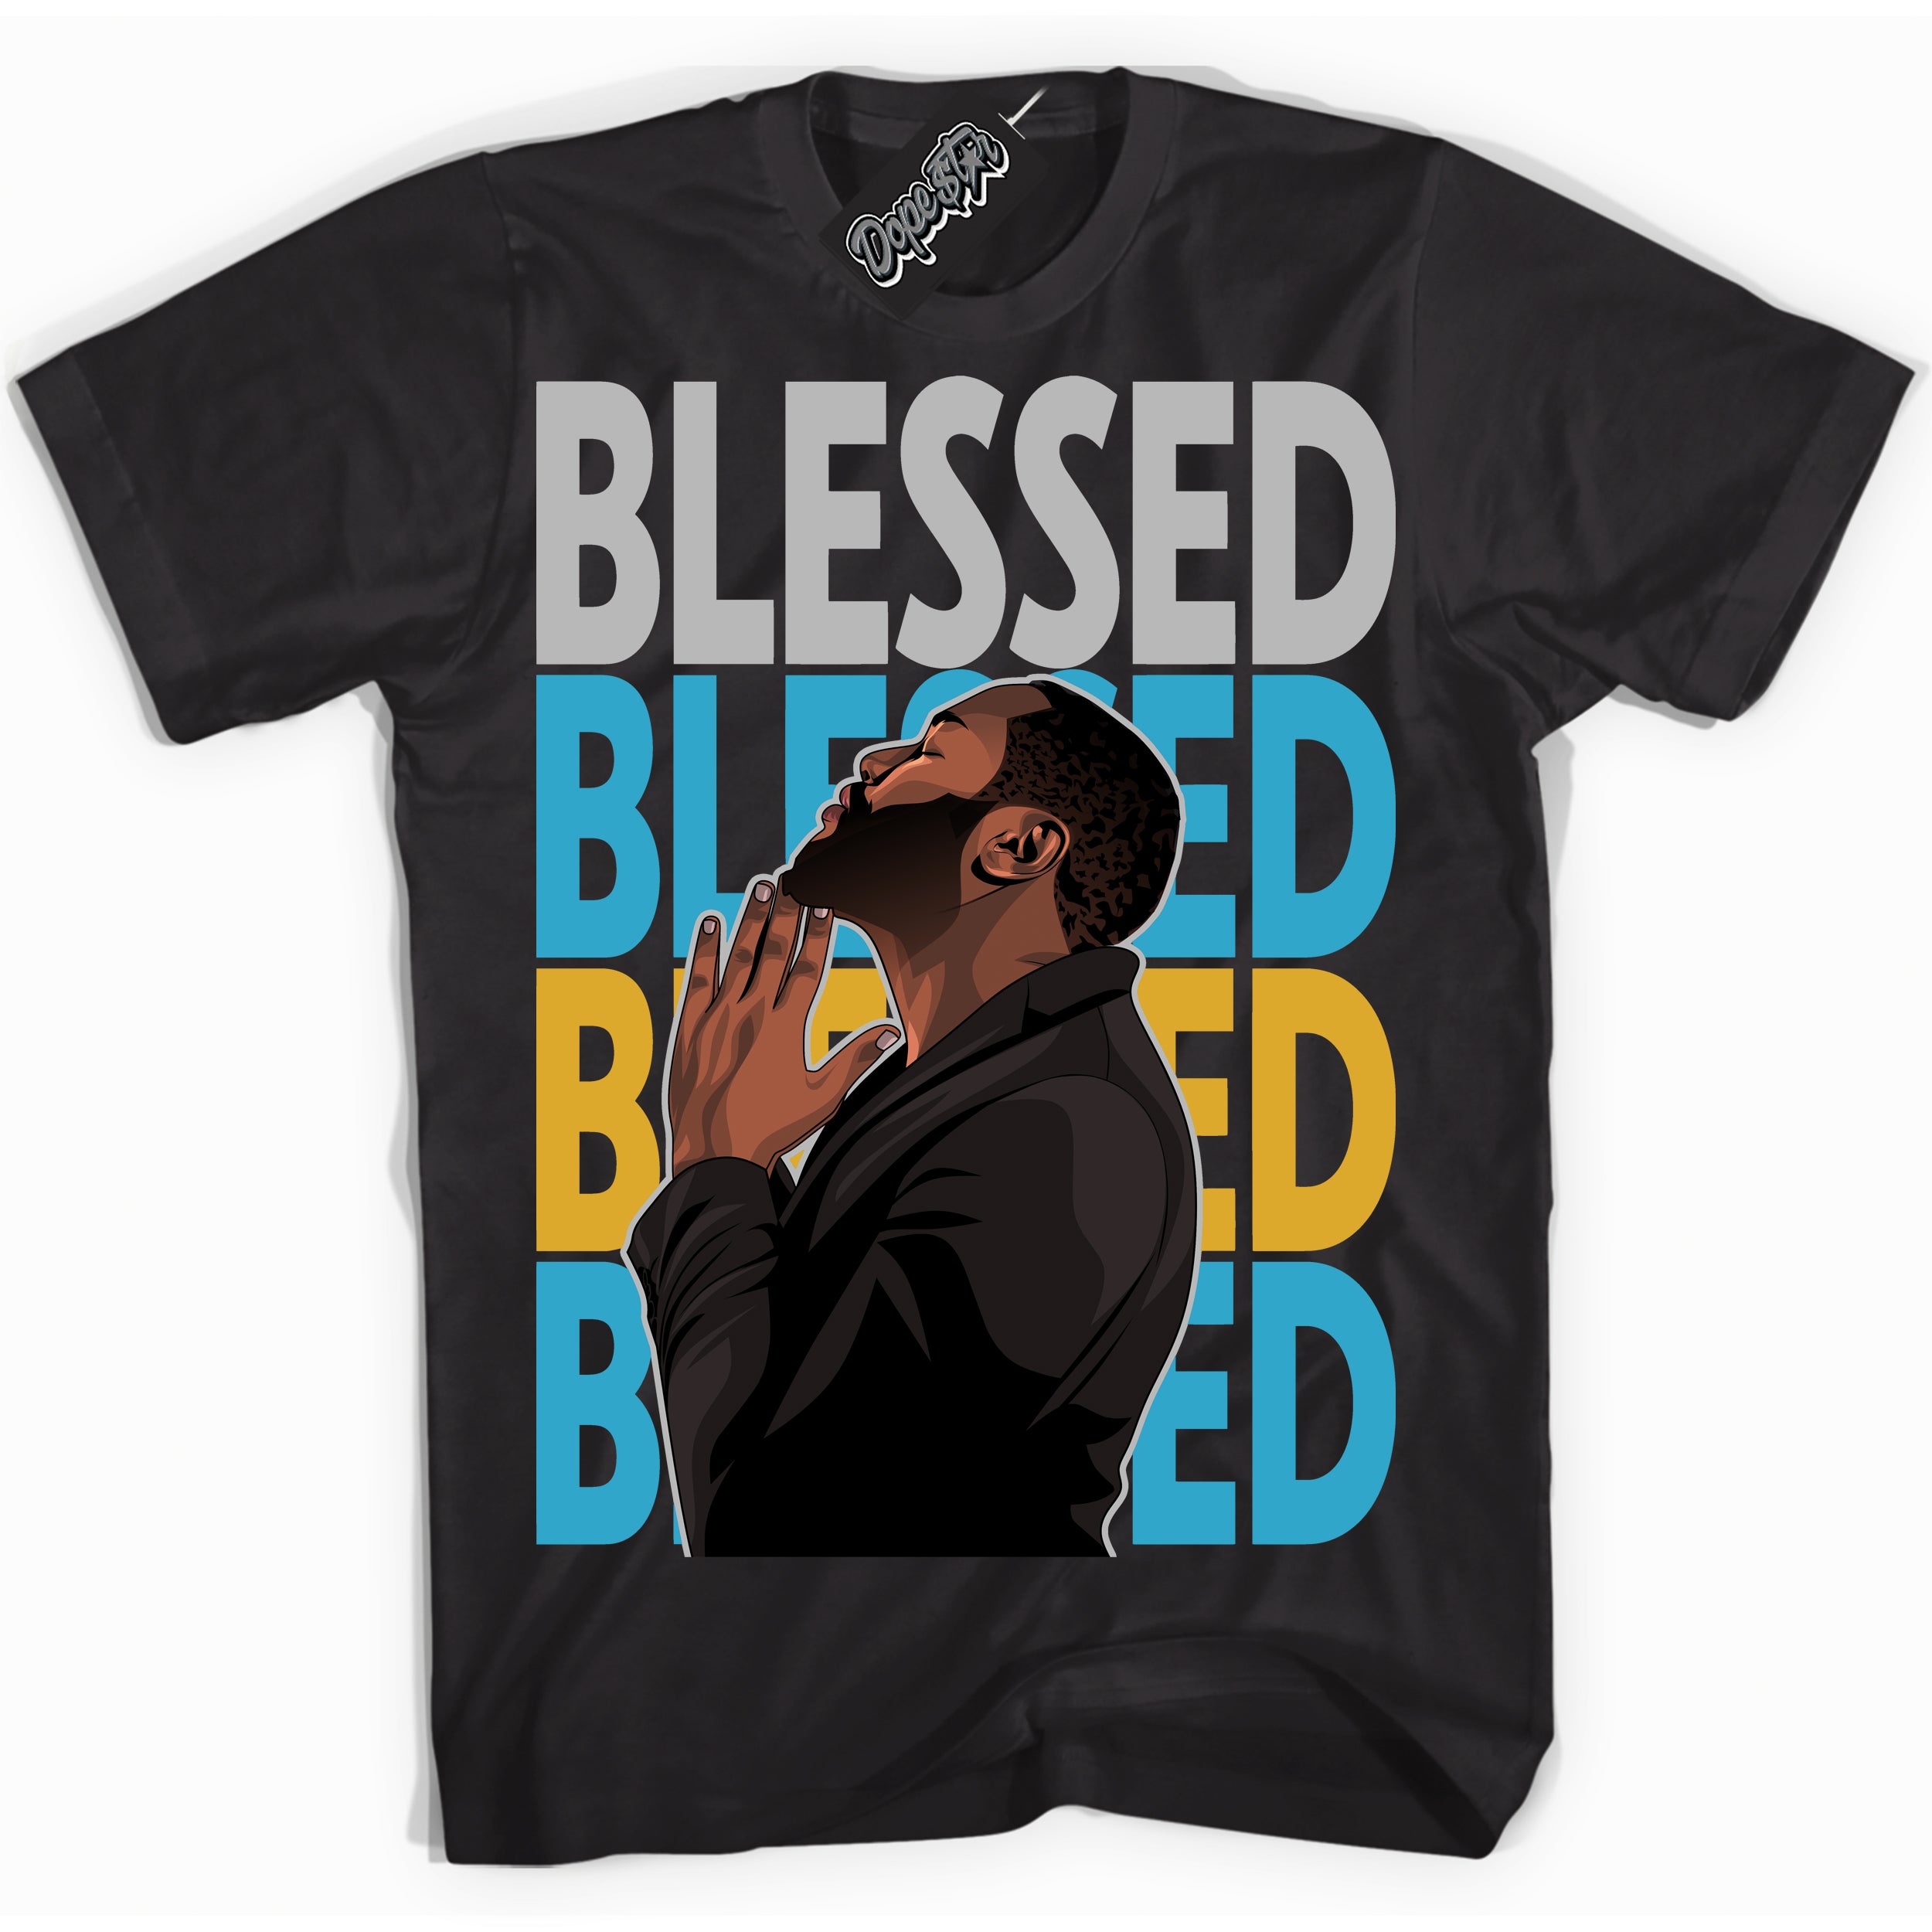 Cool Black graphic tee with “ God Blessed ” print, that perfectly matches Air Jordan 5 Aqua sneakers